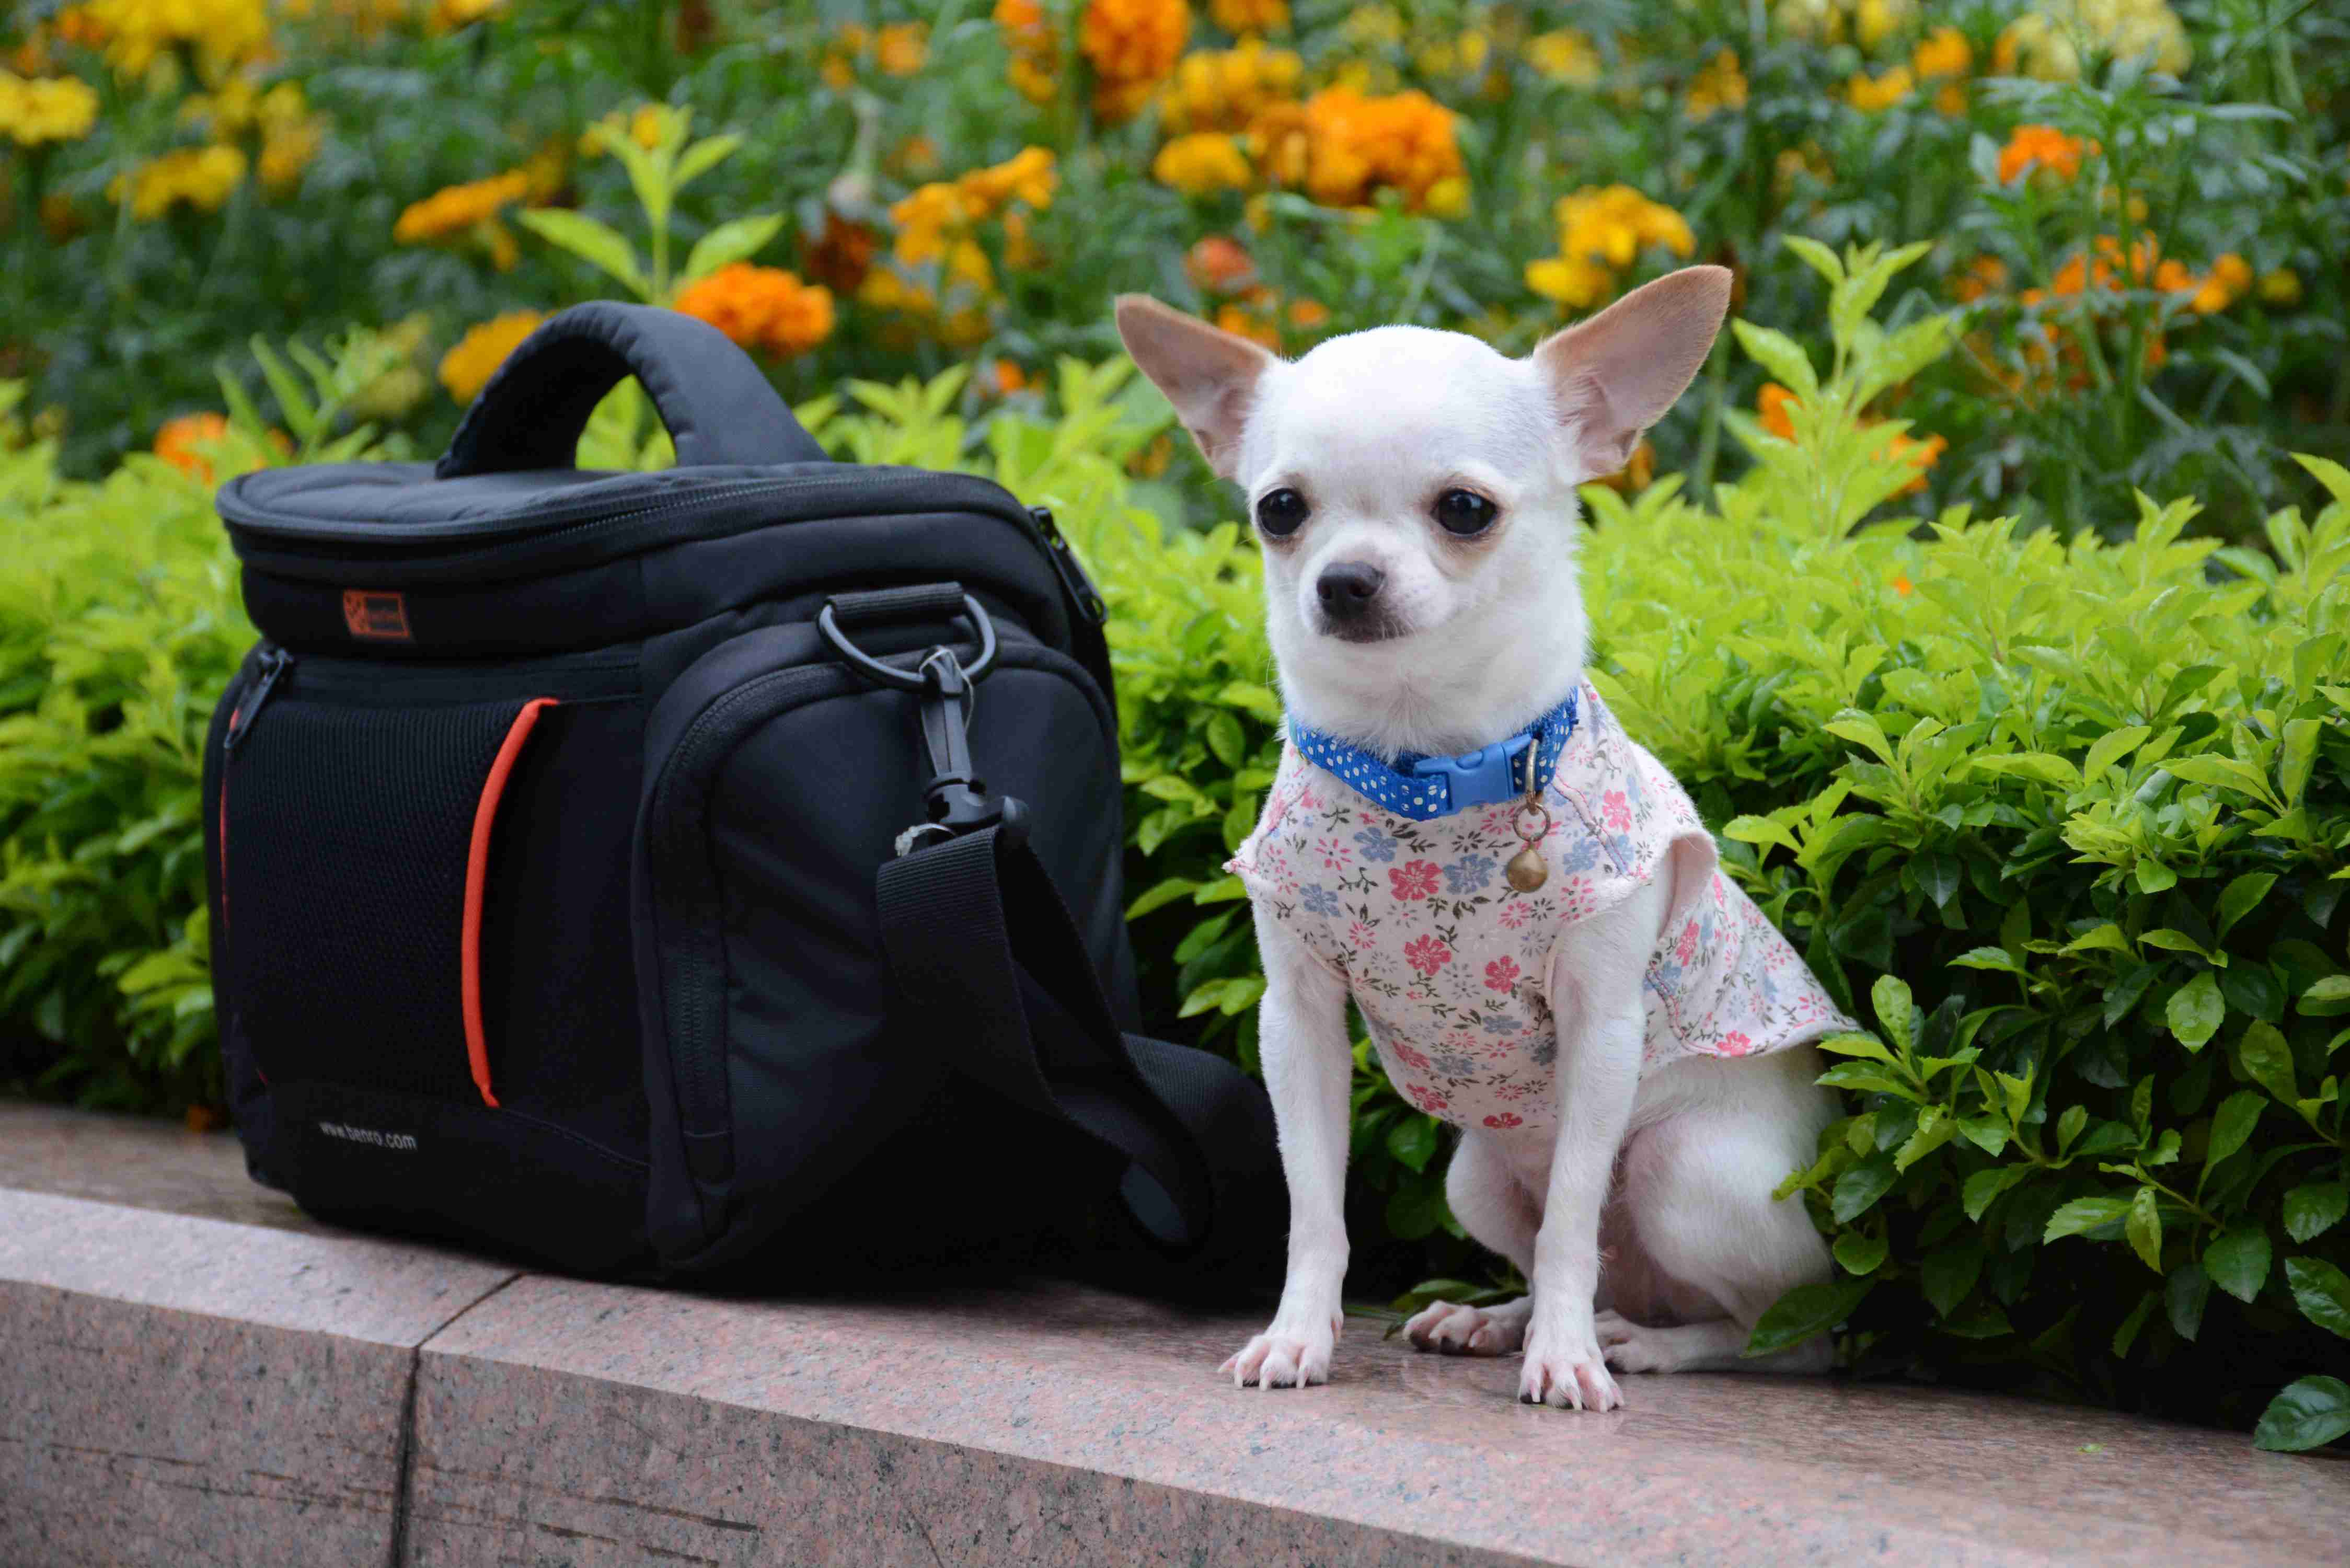 How can I safely introduce my Chihuahua to new people and animals?